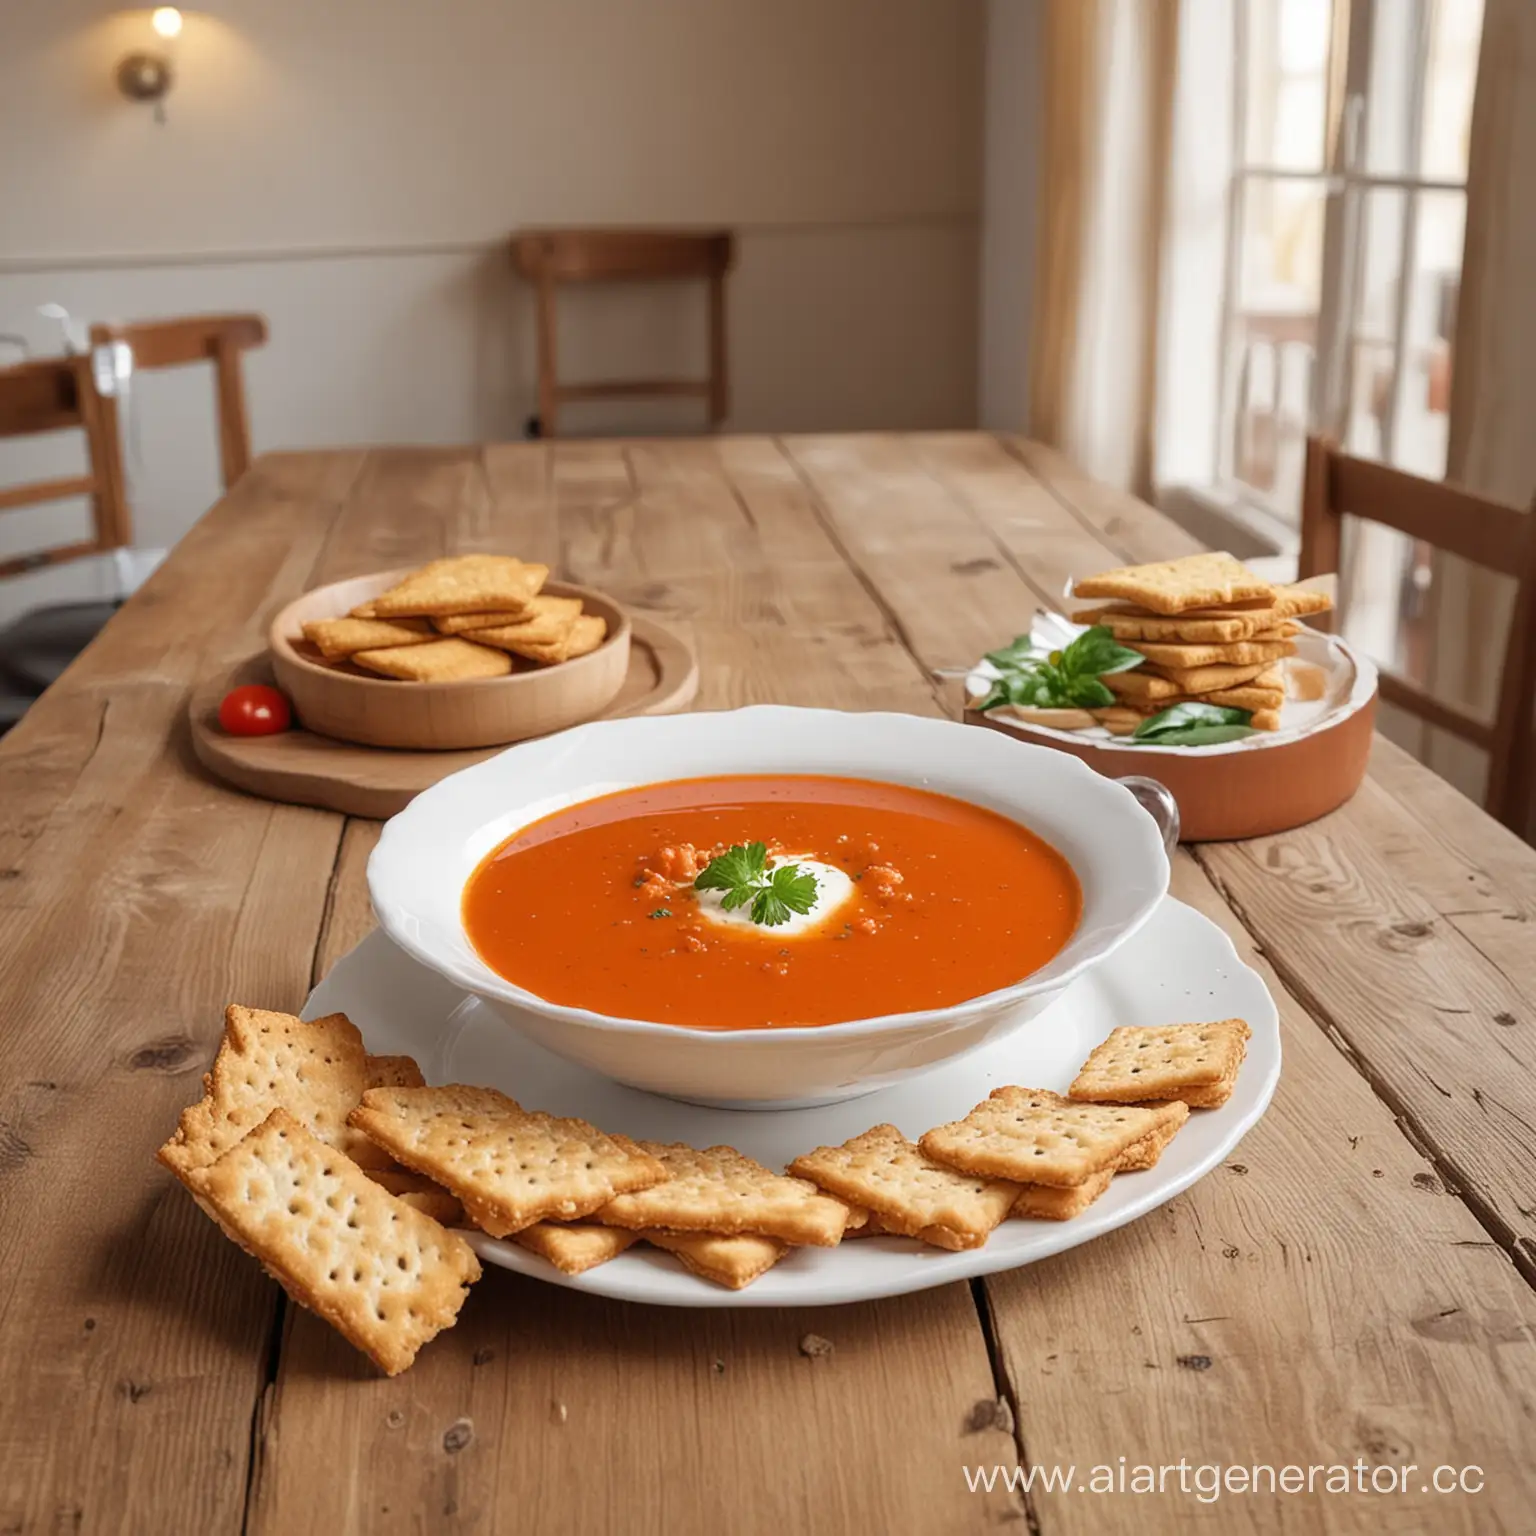 Tomato-Soup-with-Crackers-Delicious-Comfort-Food-in-a-Restaurant-Setting